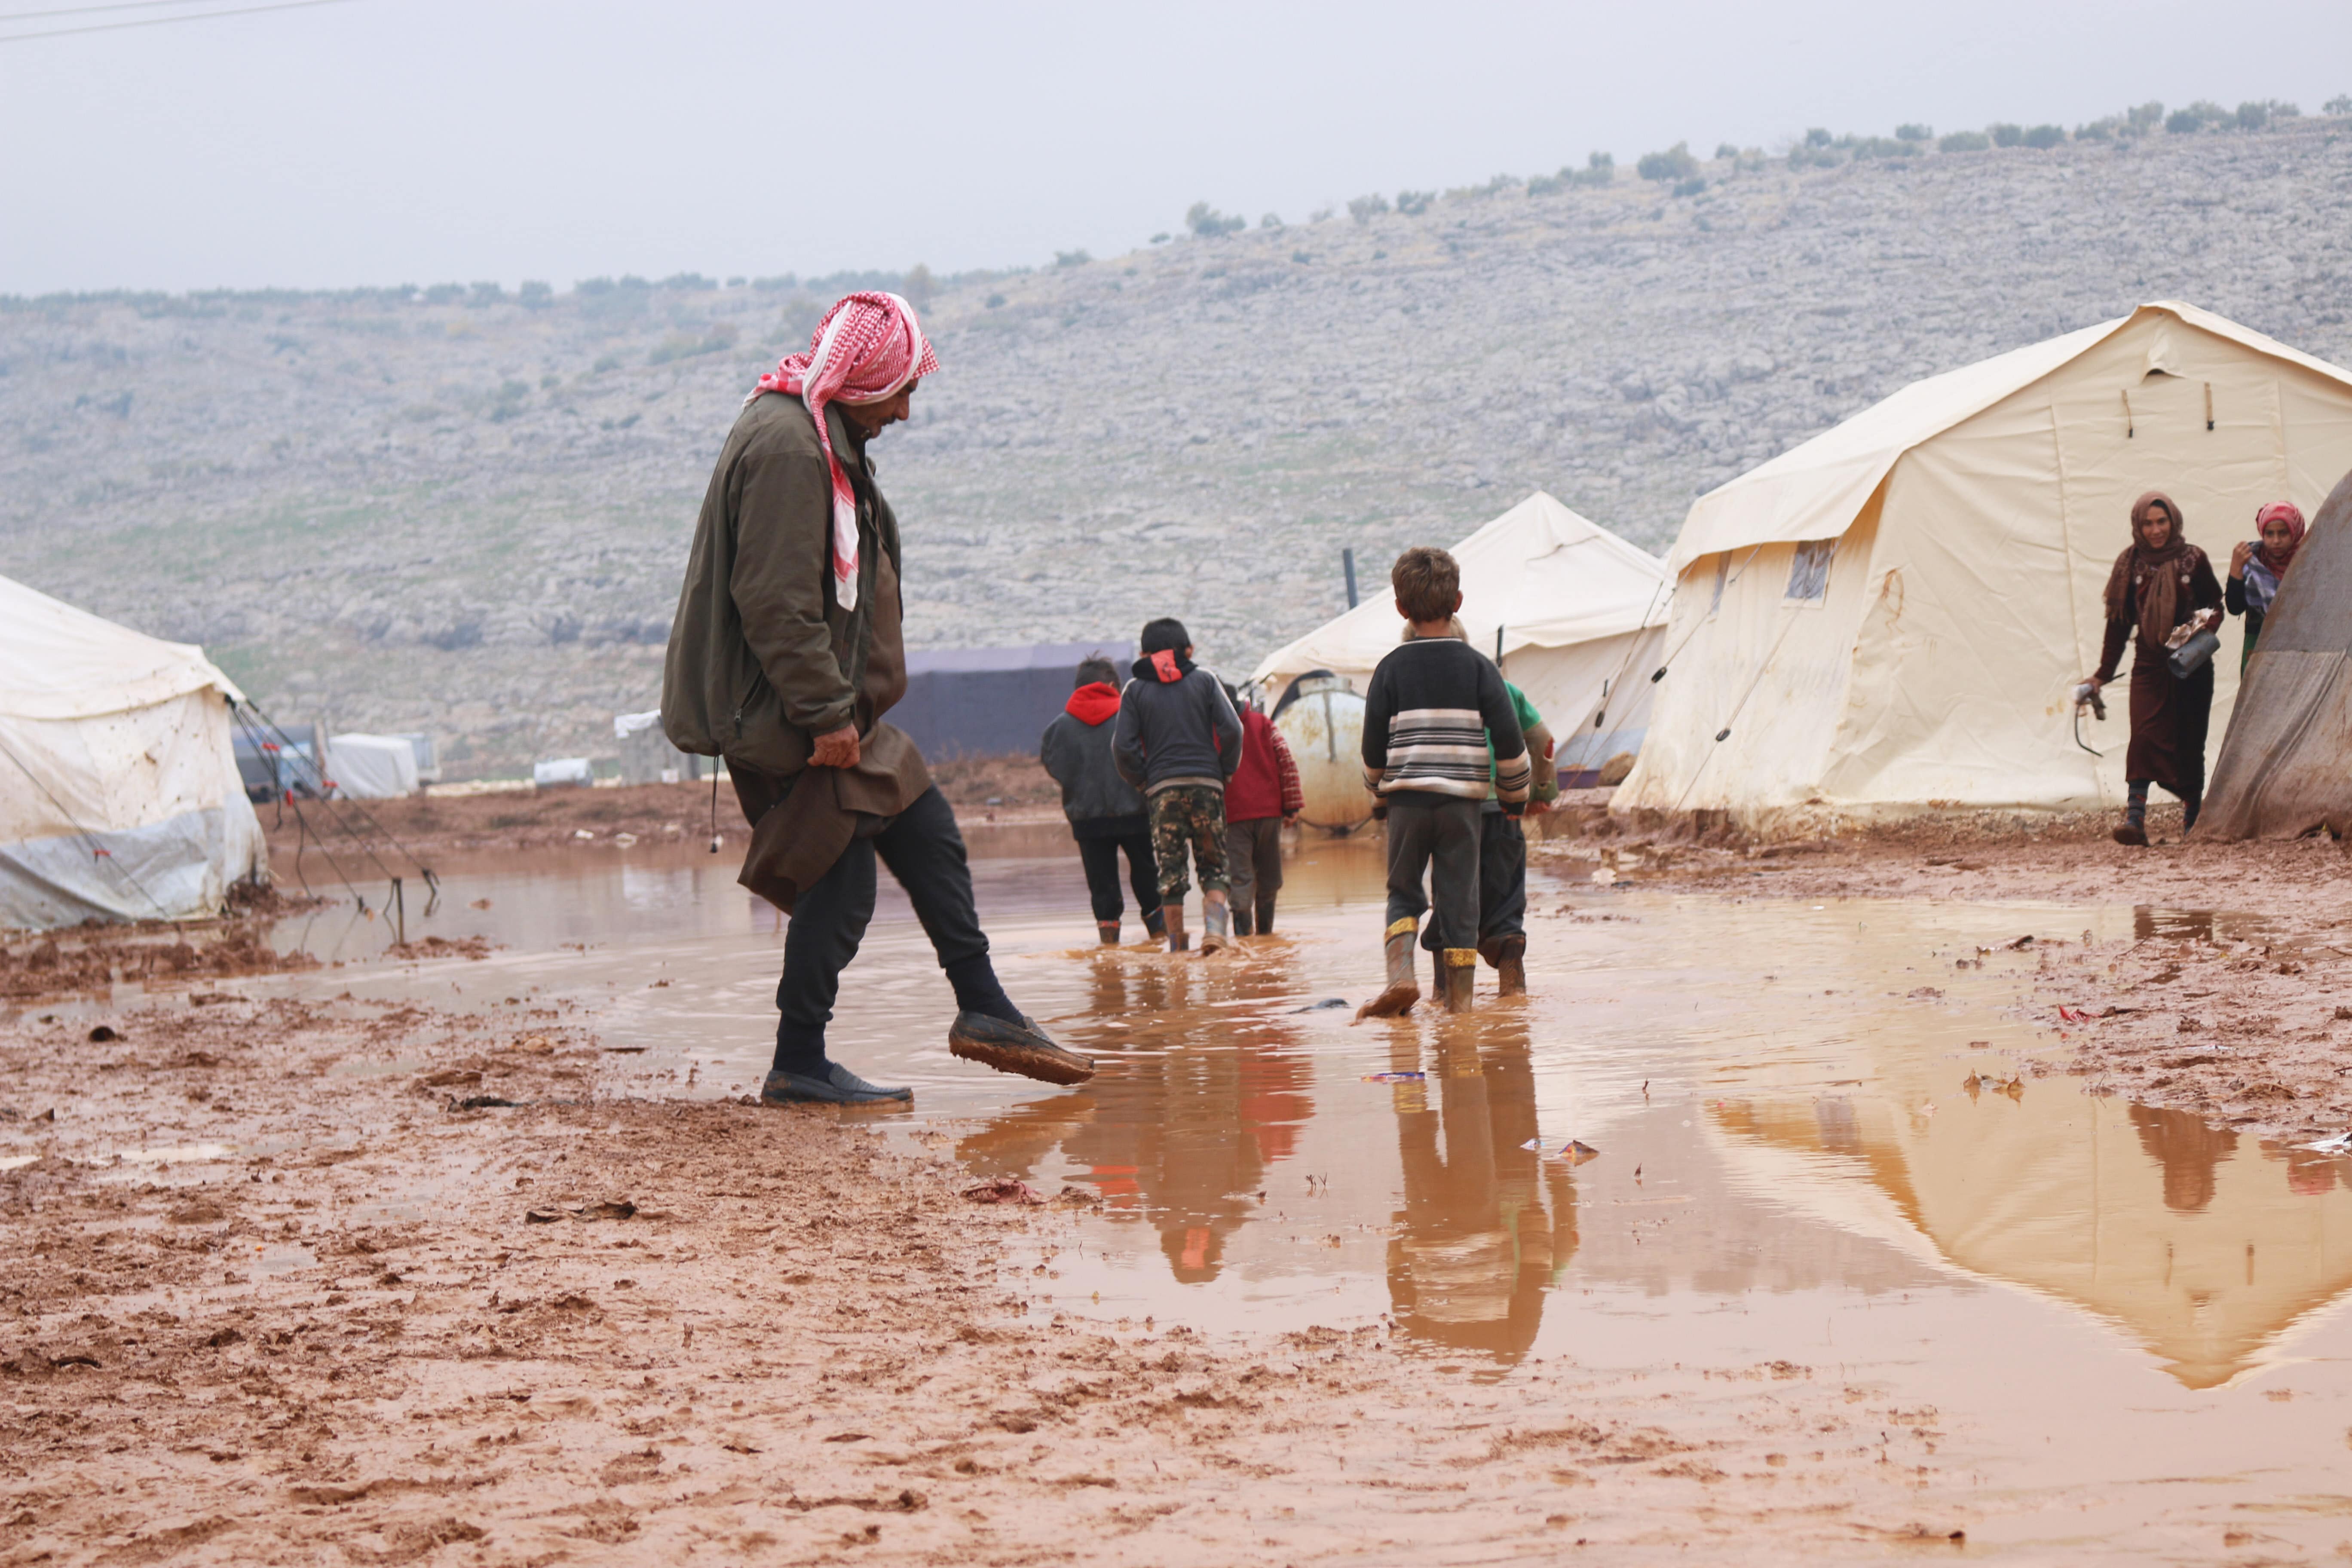 Residents say the situation in the camps has become disastrous since the rains 